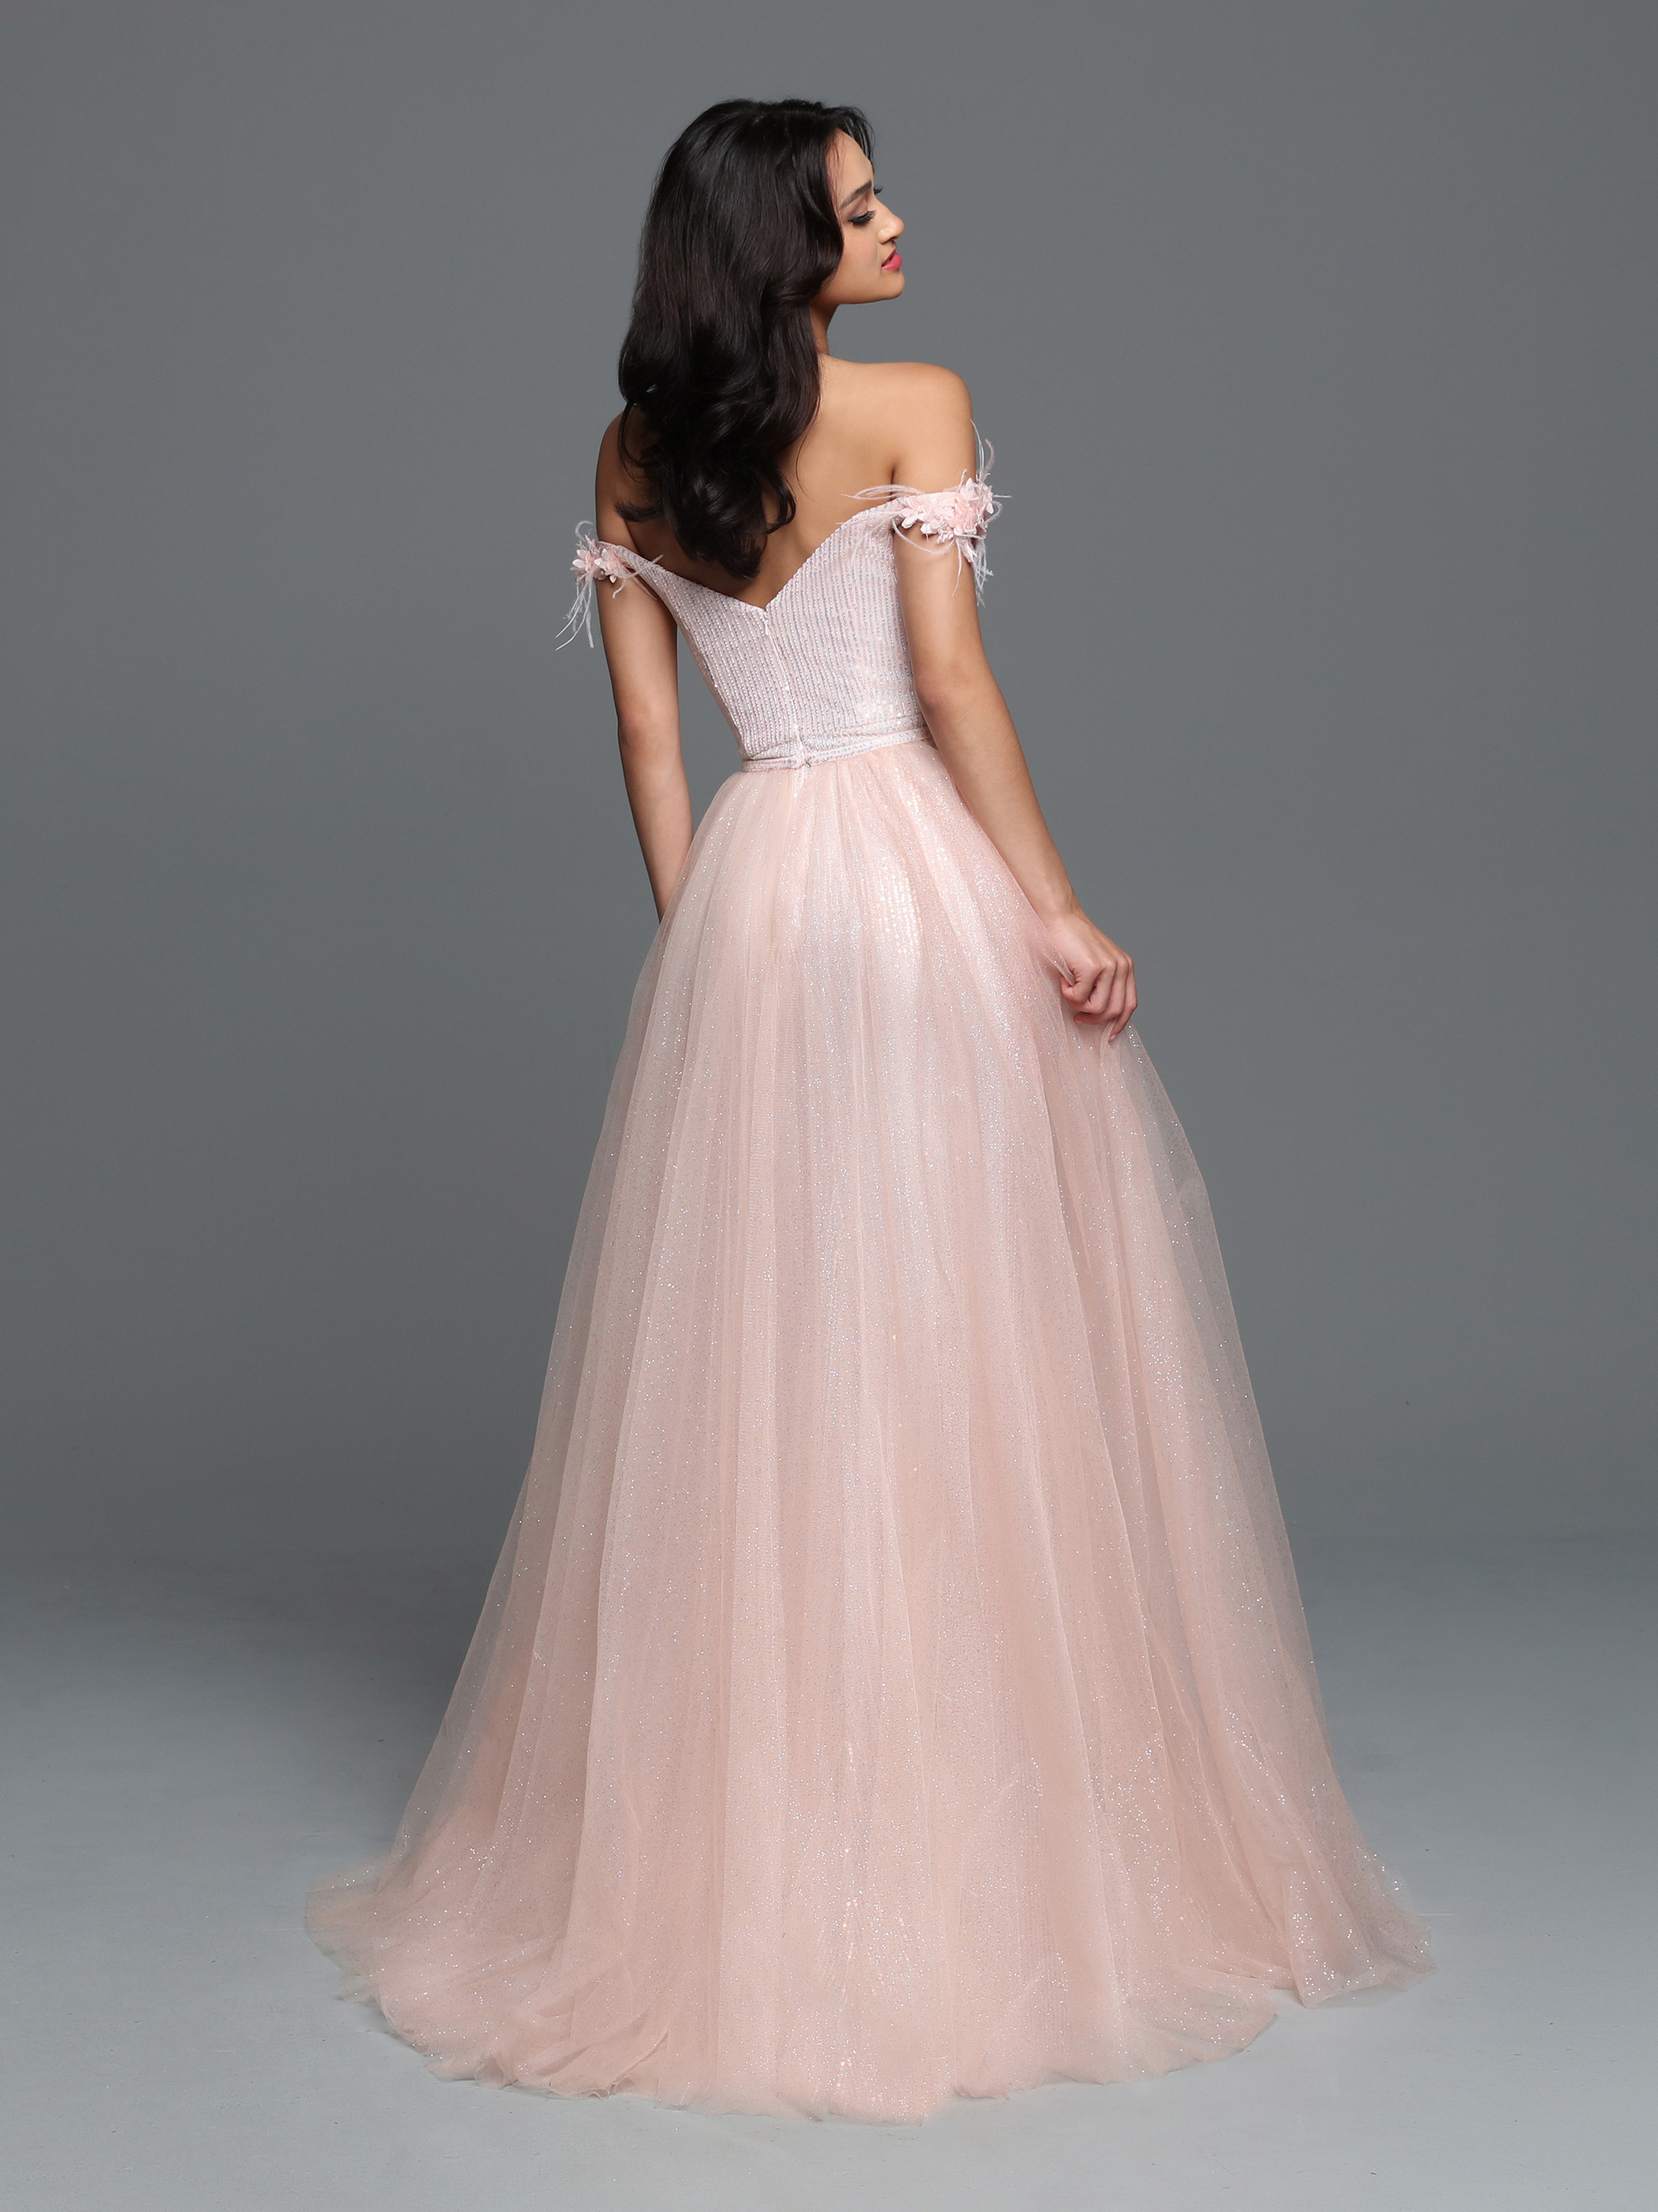 Image showing back view of style #72291